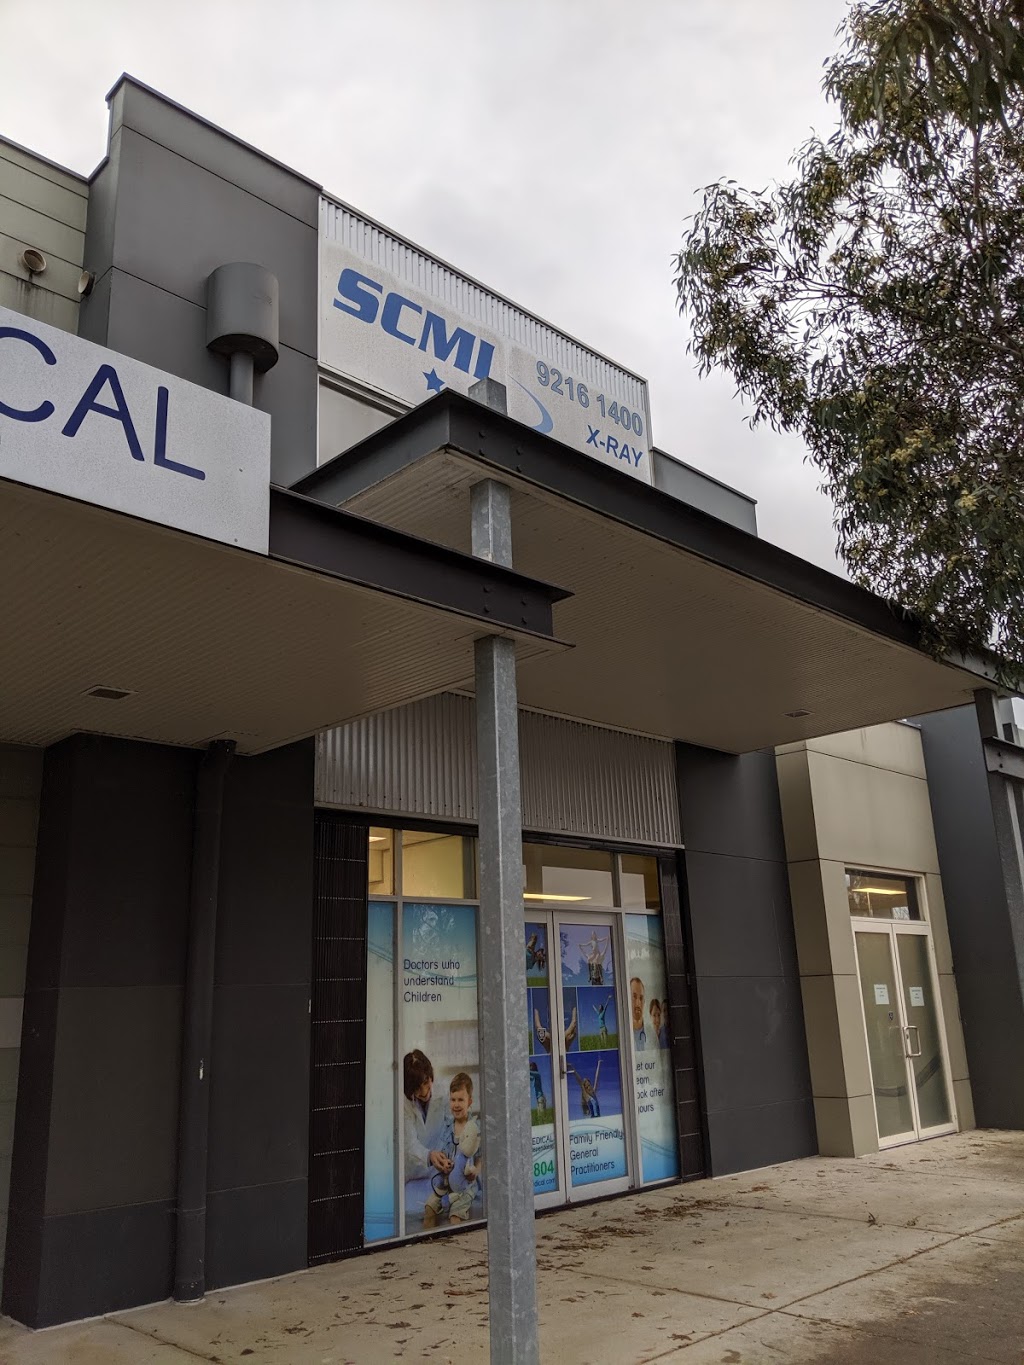 Southern Cross Medical Imaging | Laurimar Specialist Centre, 120-122 Painted Hills Road, Doreen VIC 3754, Australia | Phone: (03) 9216 1400